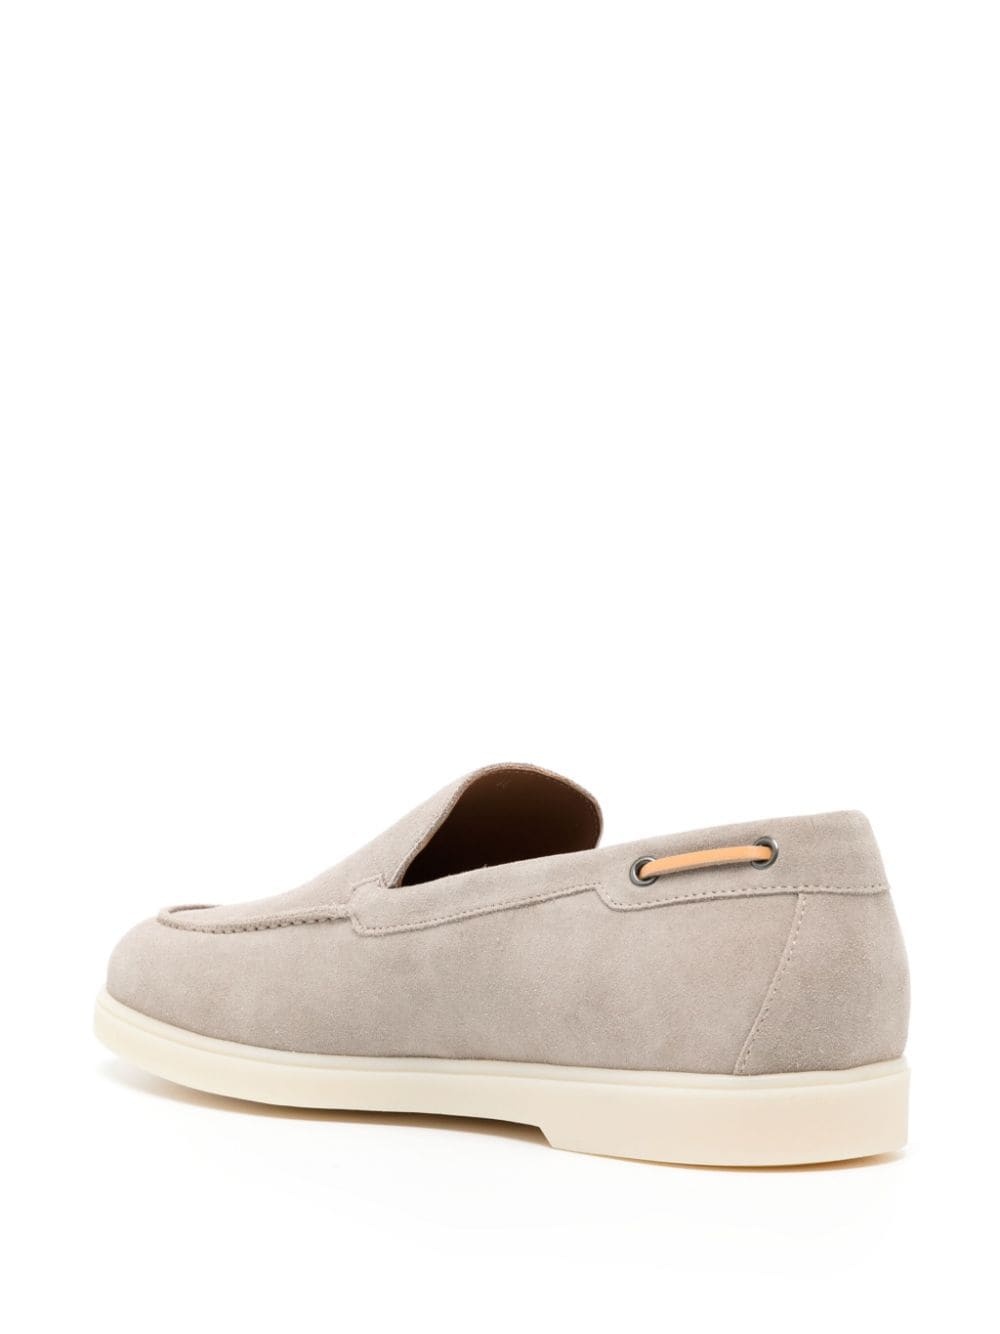 The Maui suede loafers - 3